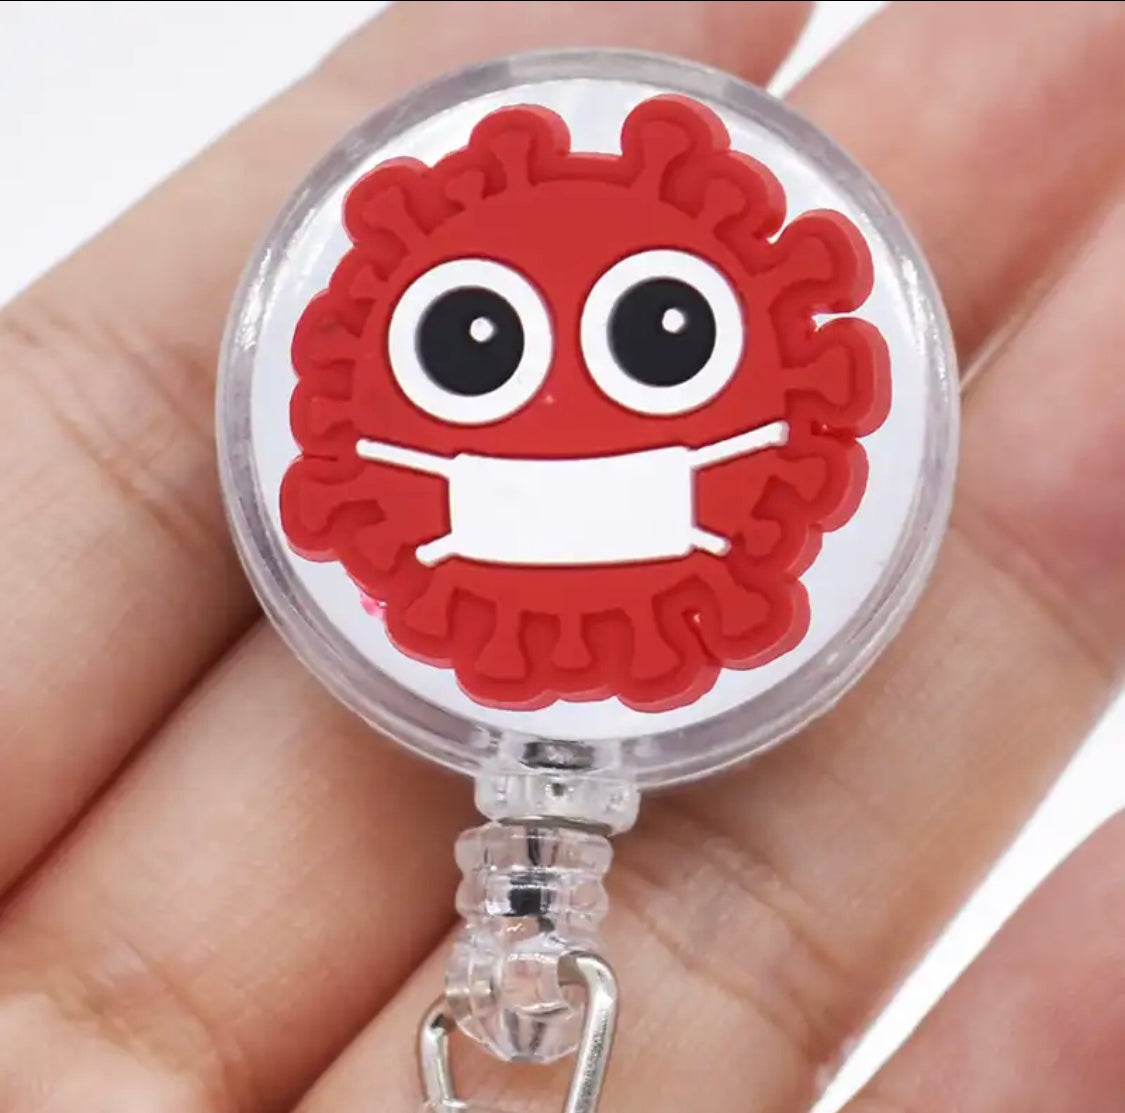 Wholesale cartoon badge reel With Many Innovative Features